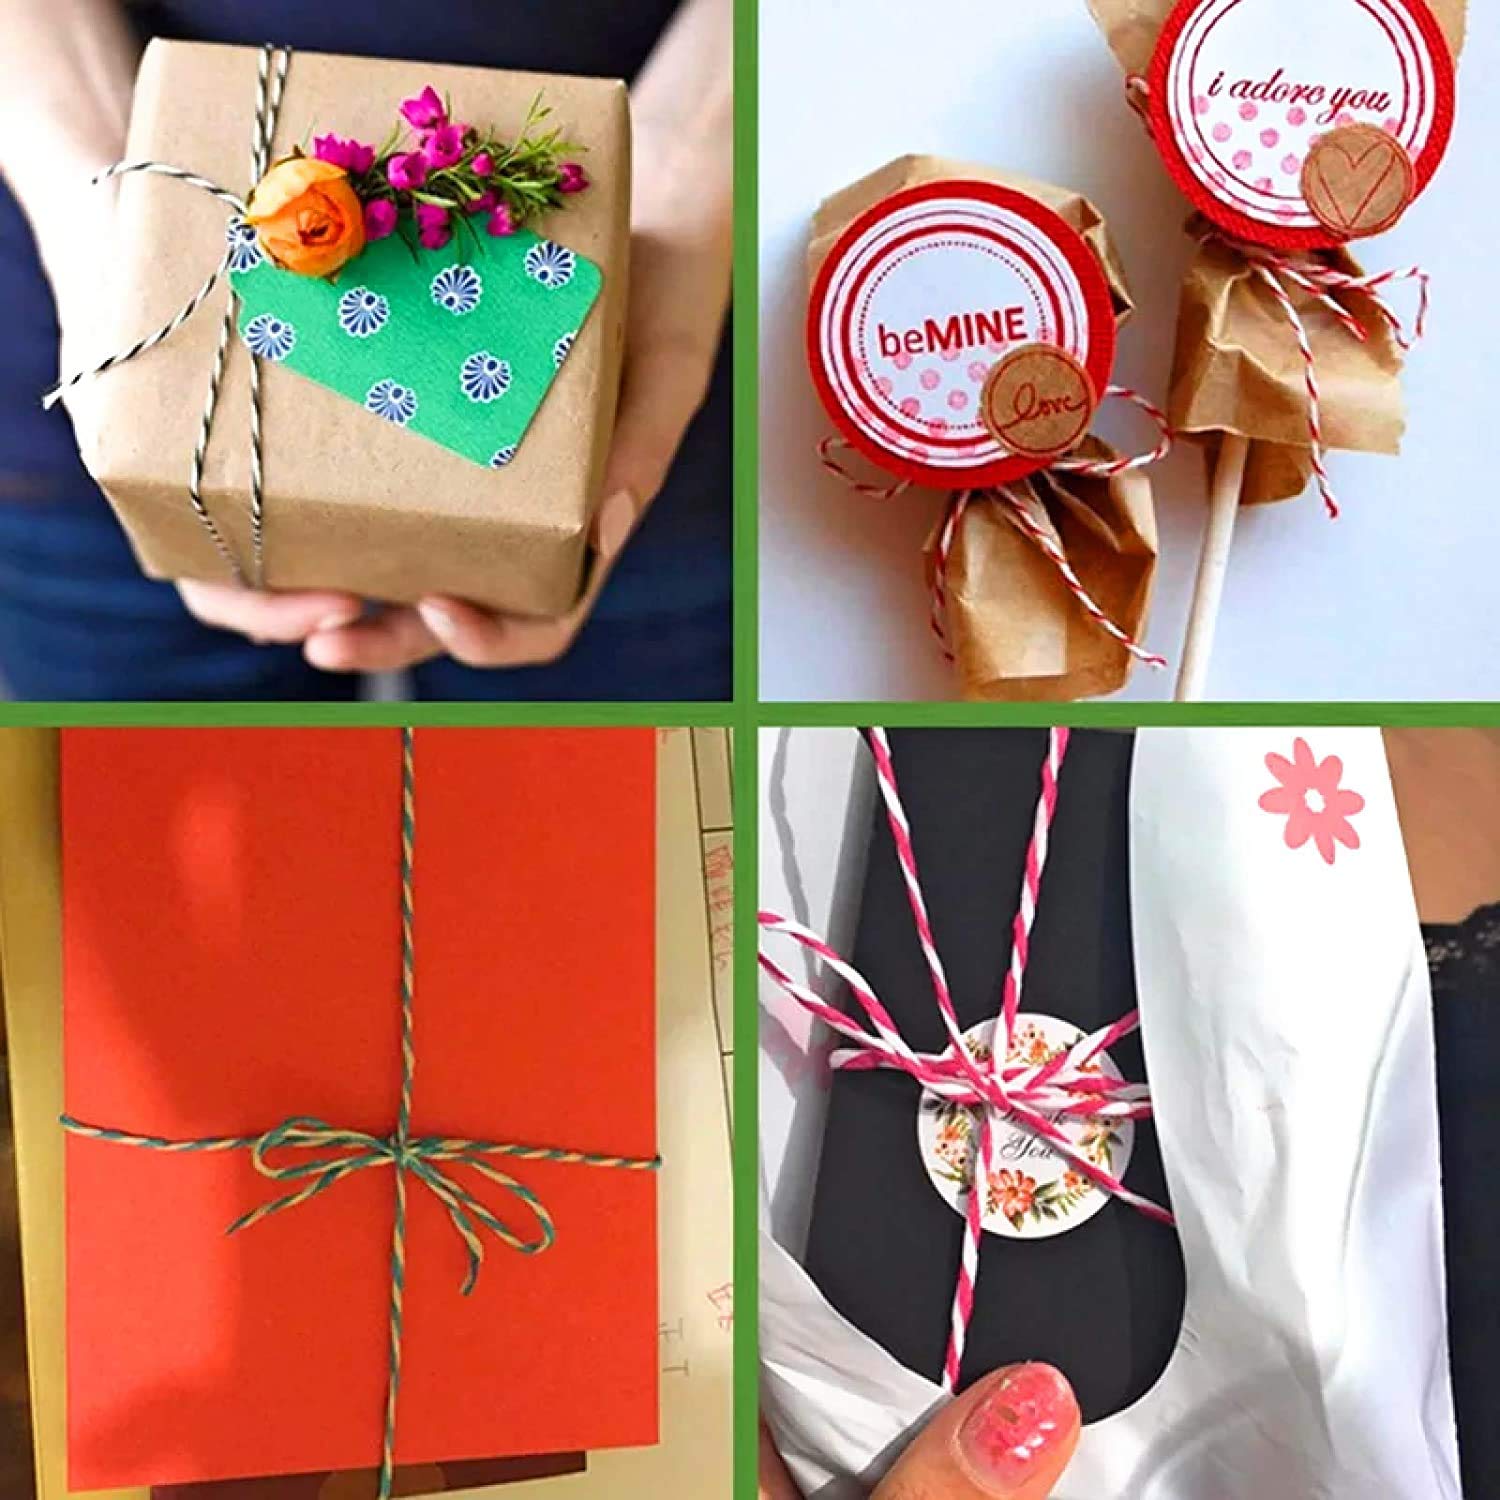 Ravrai Craft Twisted Paper Raffia Craft Favor Gift Wrapping Twine Rope Thread Scrapbooks Invitation Flower Decoration - Pack of 12.